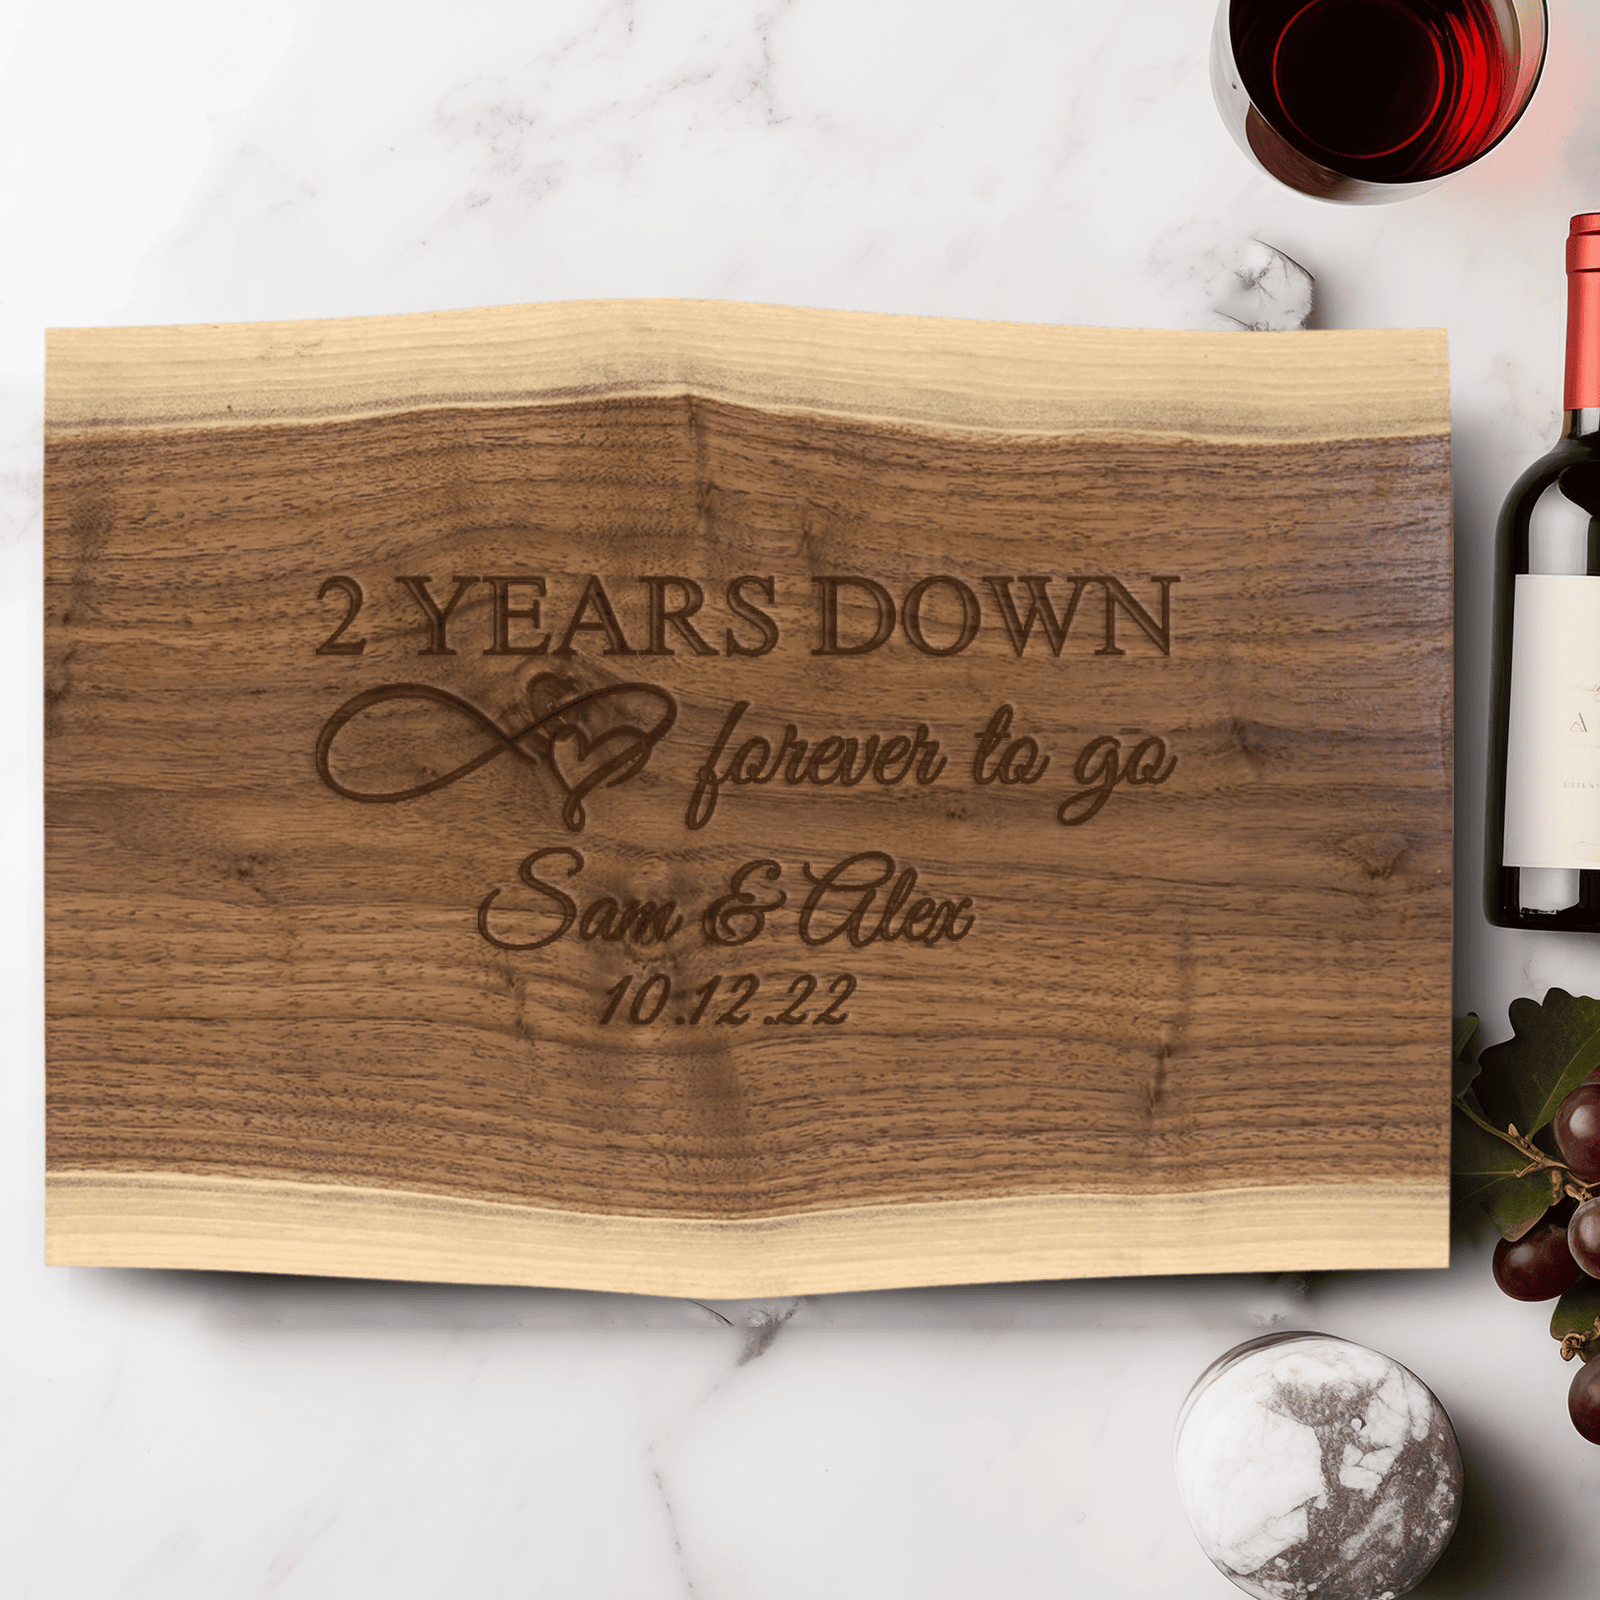 Anniversary Black Walnut Cutting Board With Two Years Down Design